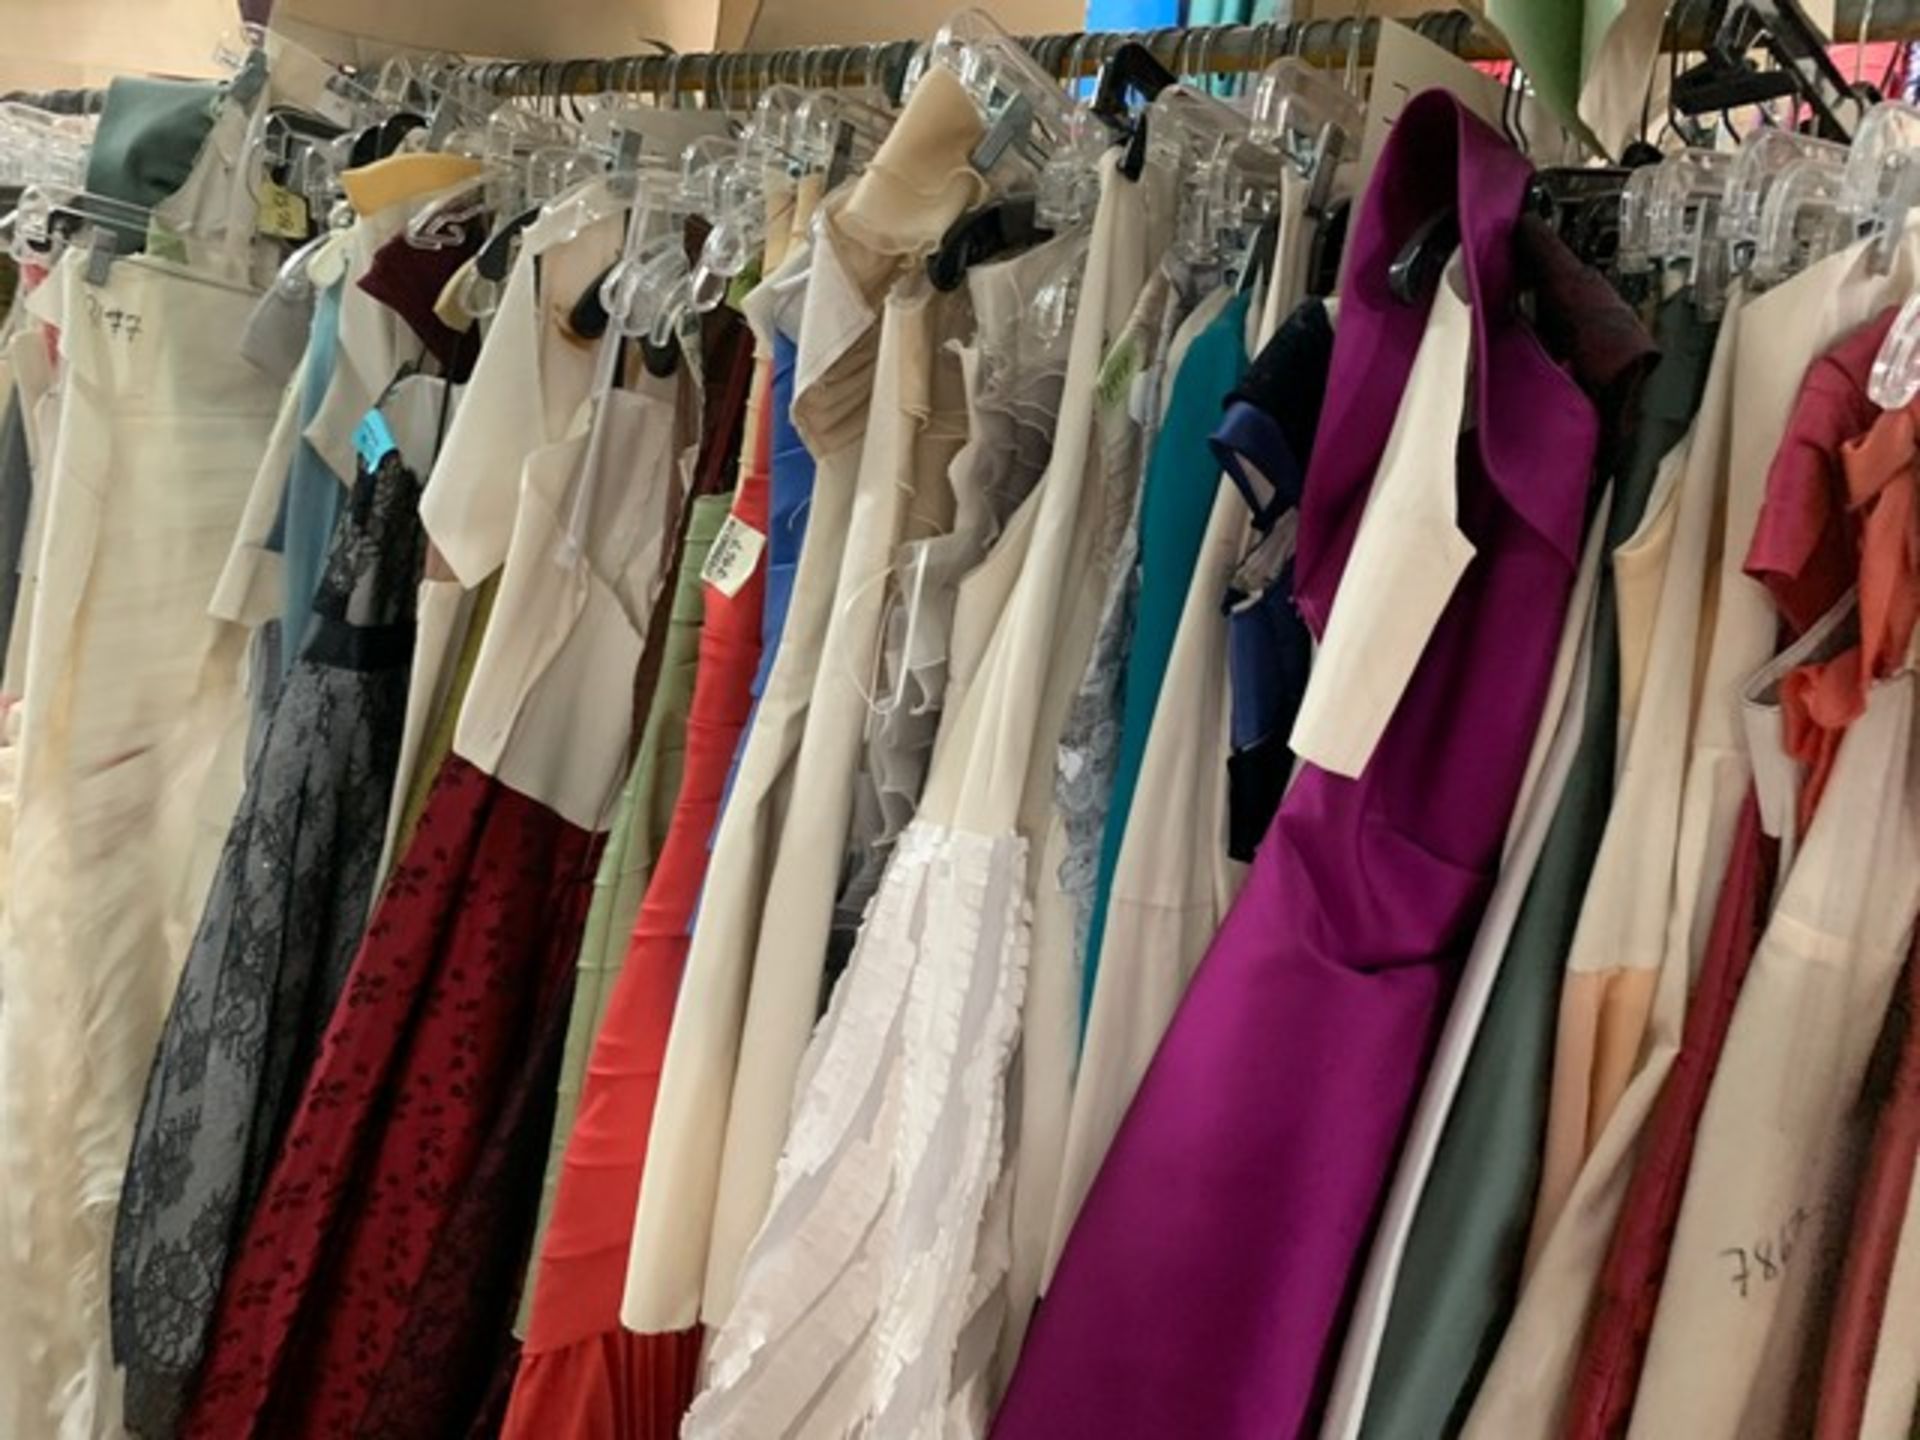 LOT ASSORTED DRESSES, REMNANTS, MATERIAL, ETC (3 ROWS) - Image 3 of 6